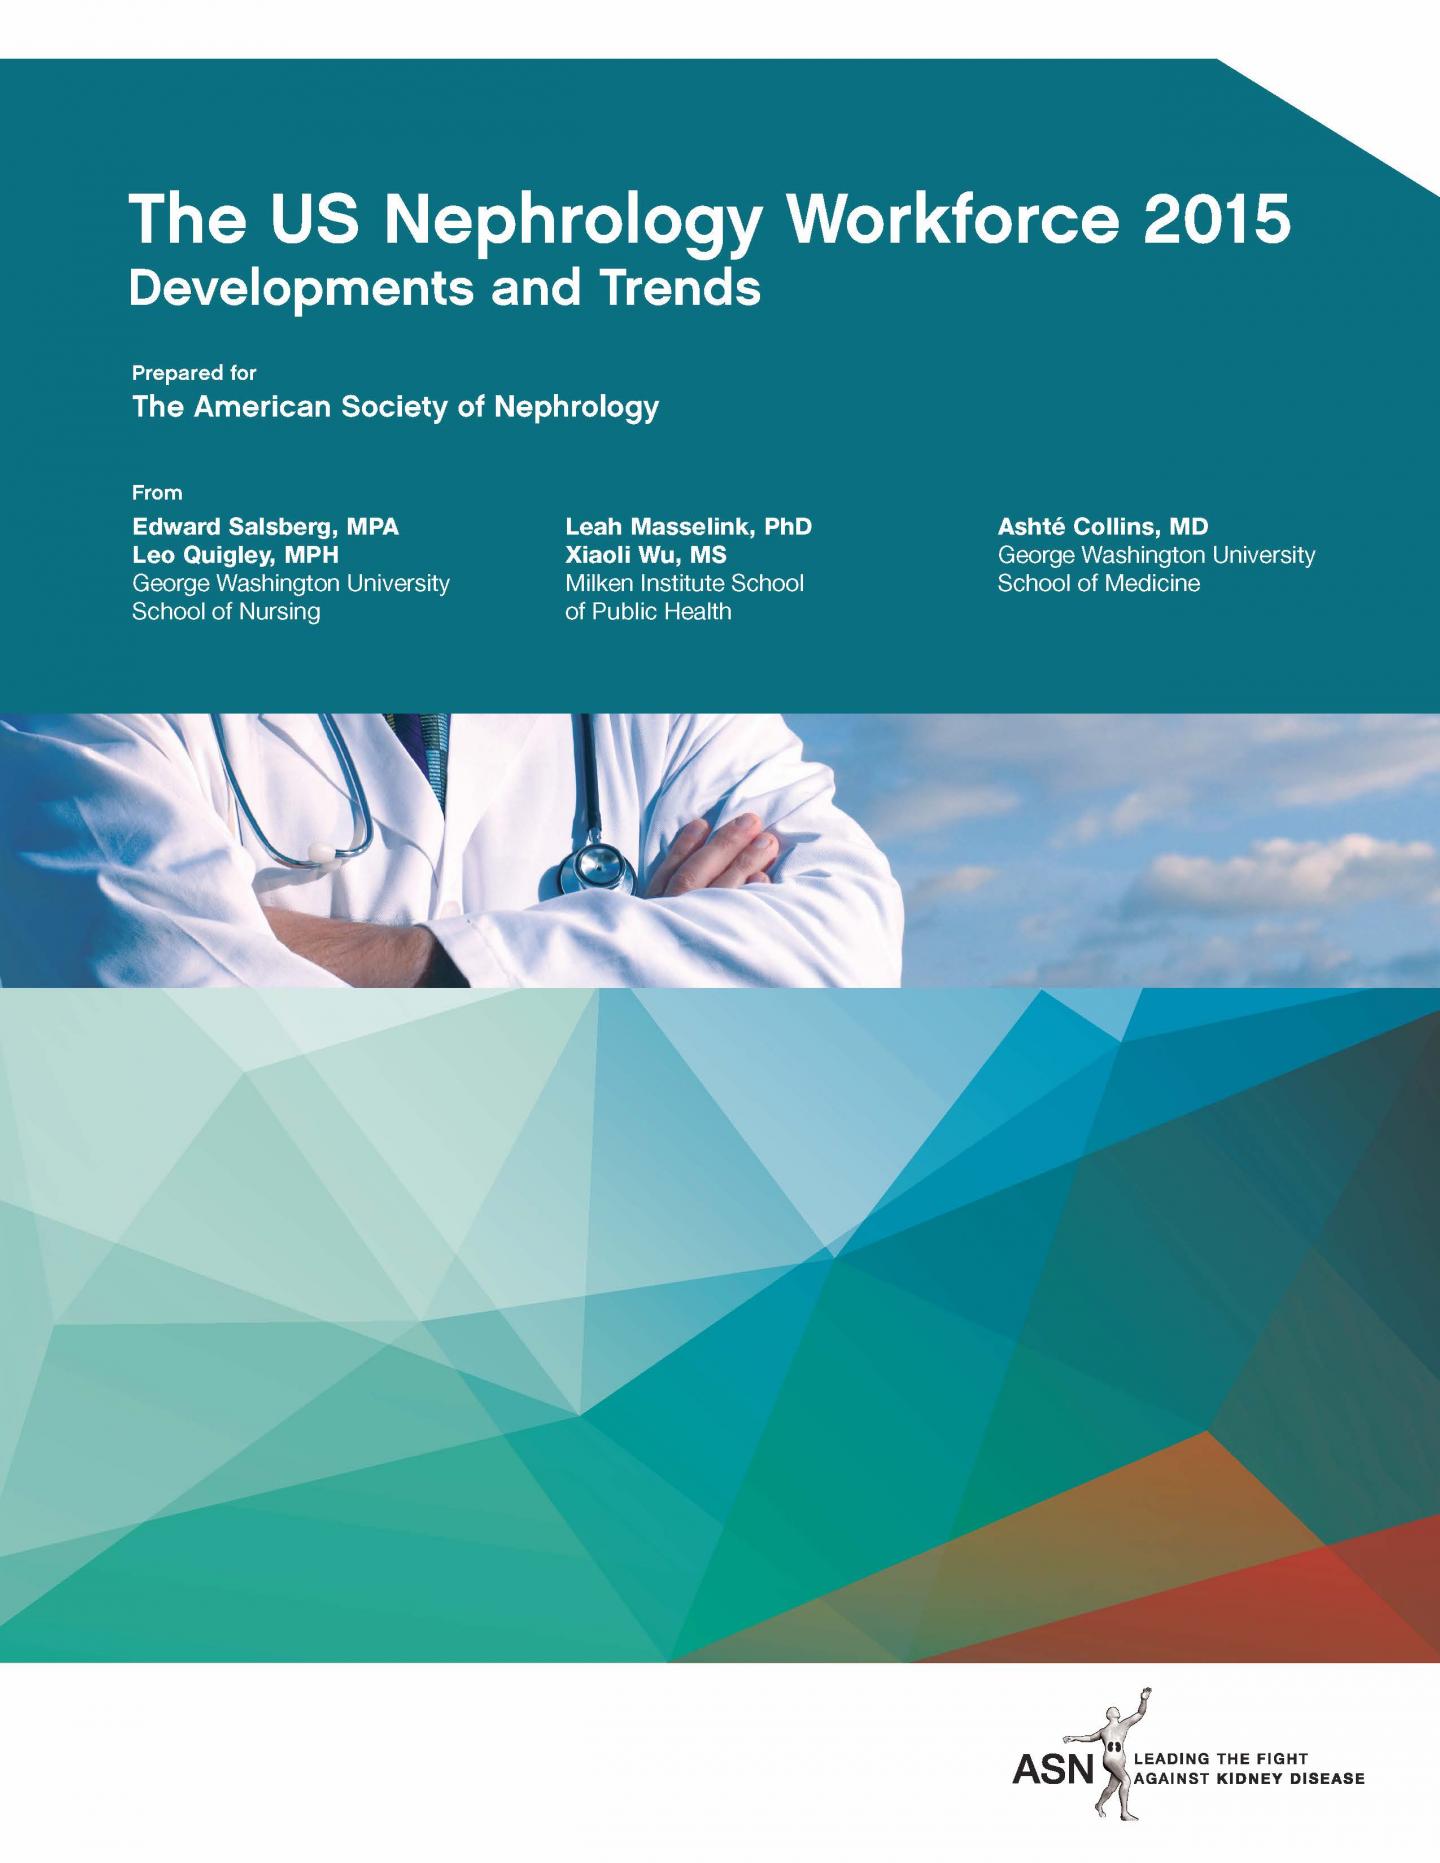 The US Nephrology Workforce 2015: Developments and Trends